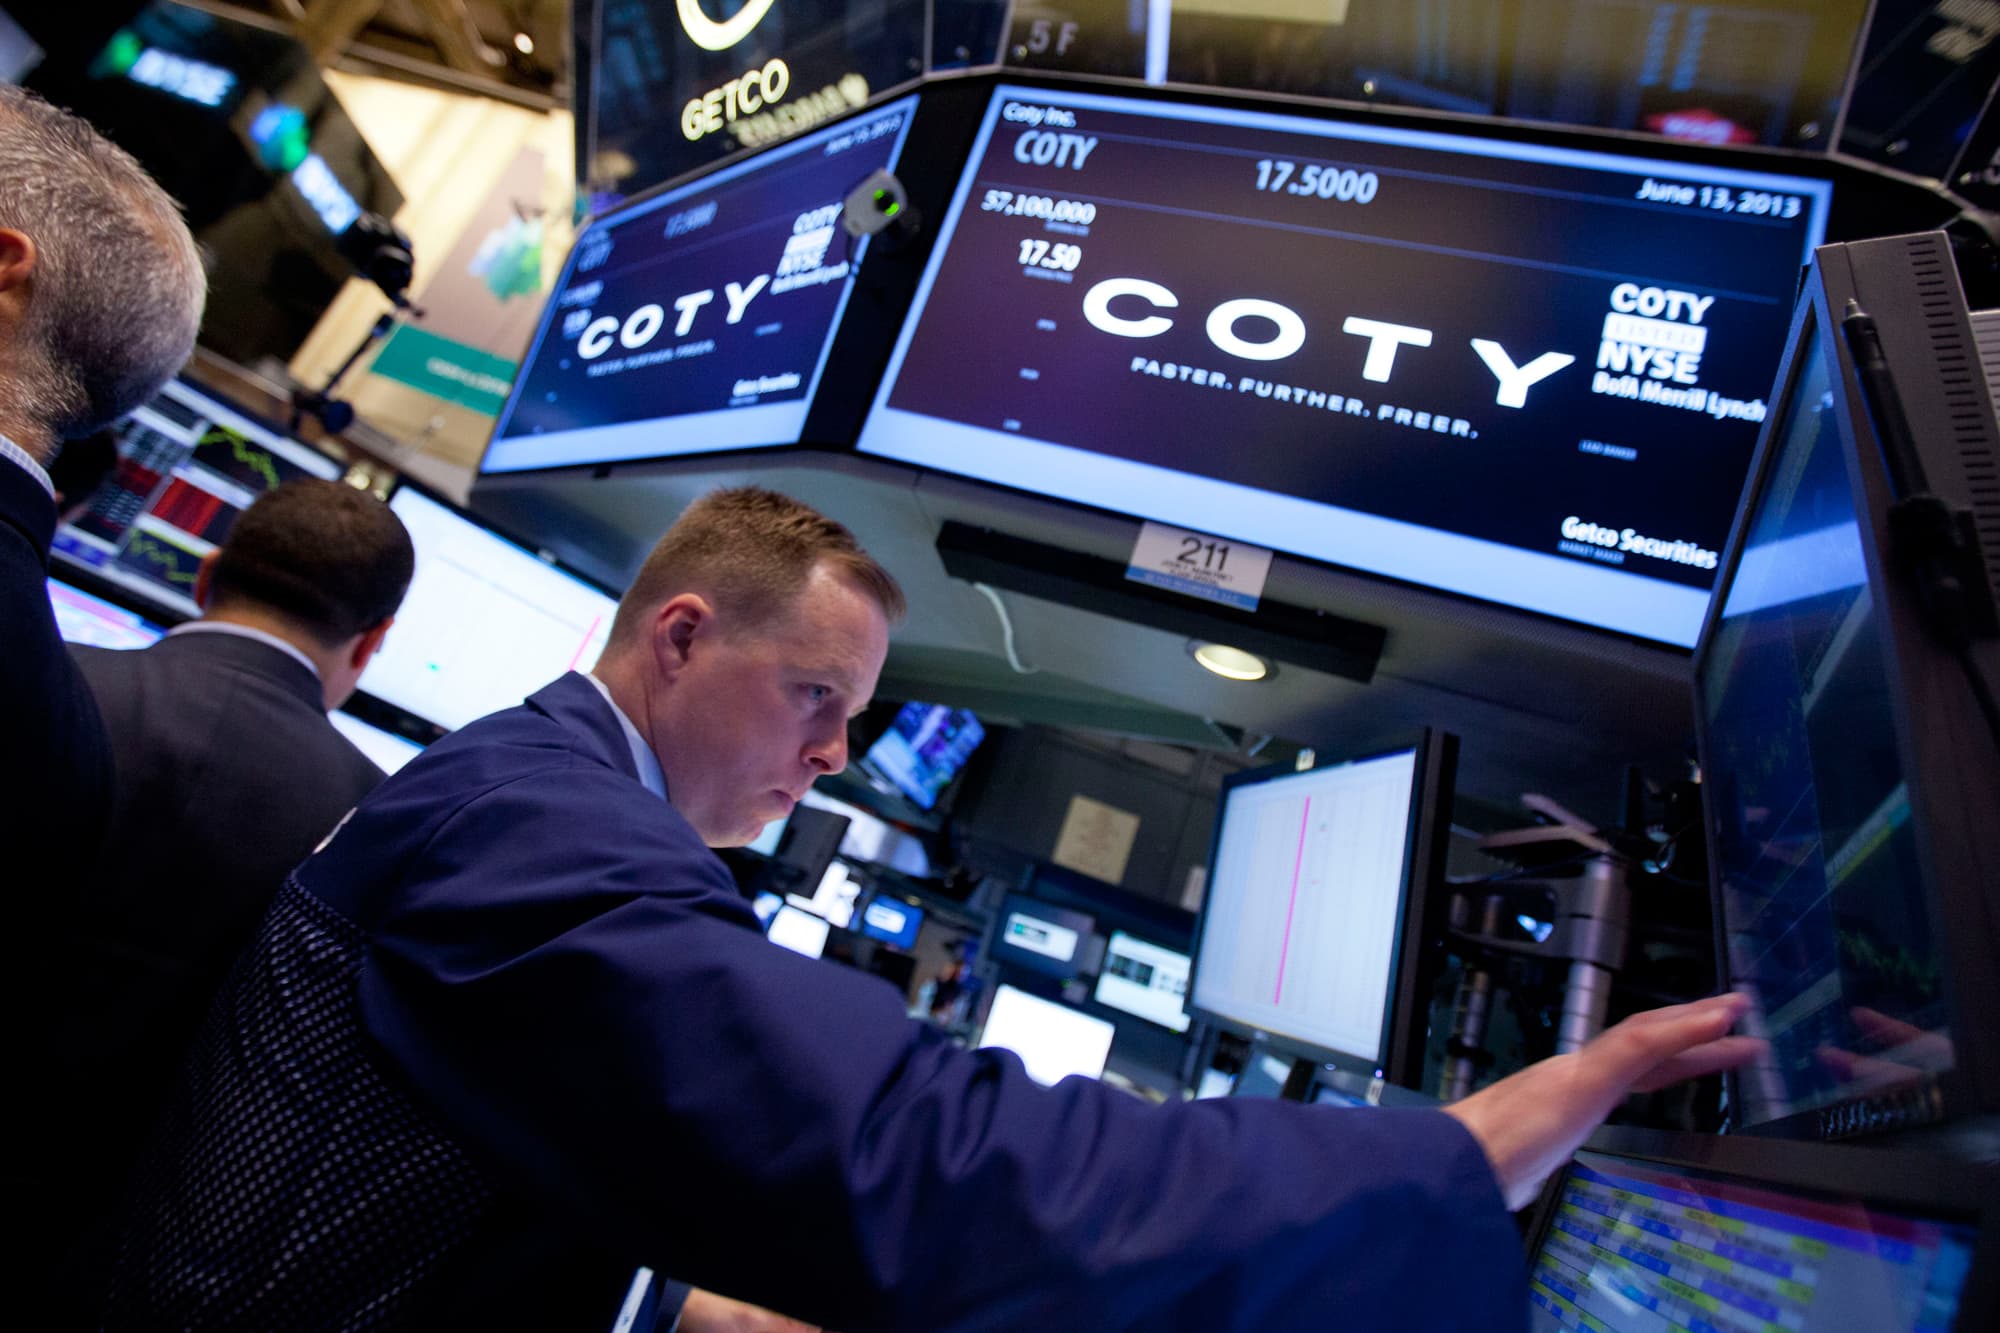 Stocks making the biggest moves premarket: Coty, Dollar General, Dollar Tree, Smucker and others